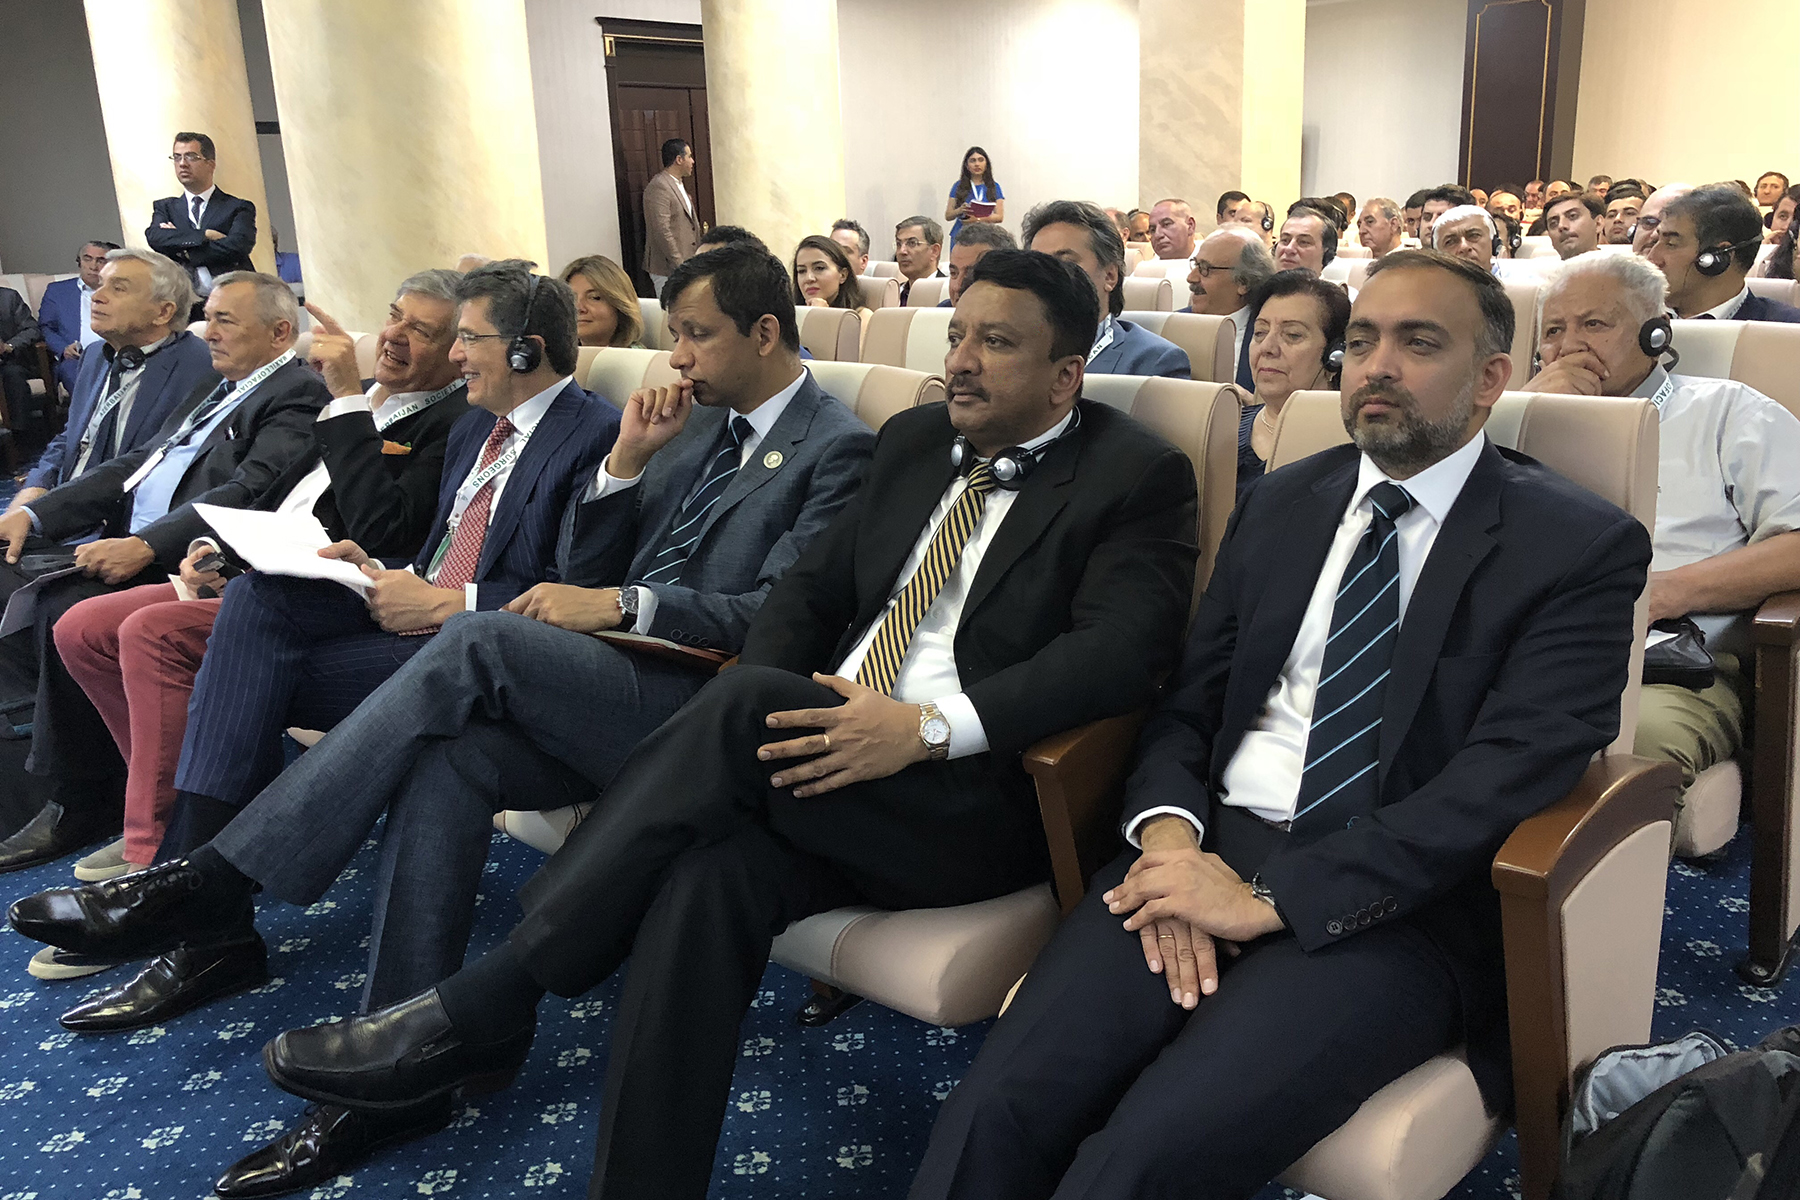 Dr Sm Balaji Seated With The Audience After His Icpf Presentation At Azerbaijan Society Of Oral And Maxillofacial Surgeons (Azsoms) Presentation Ceremony